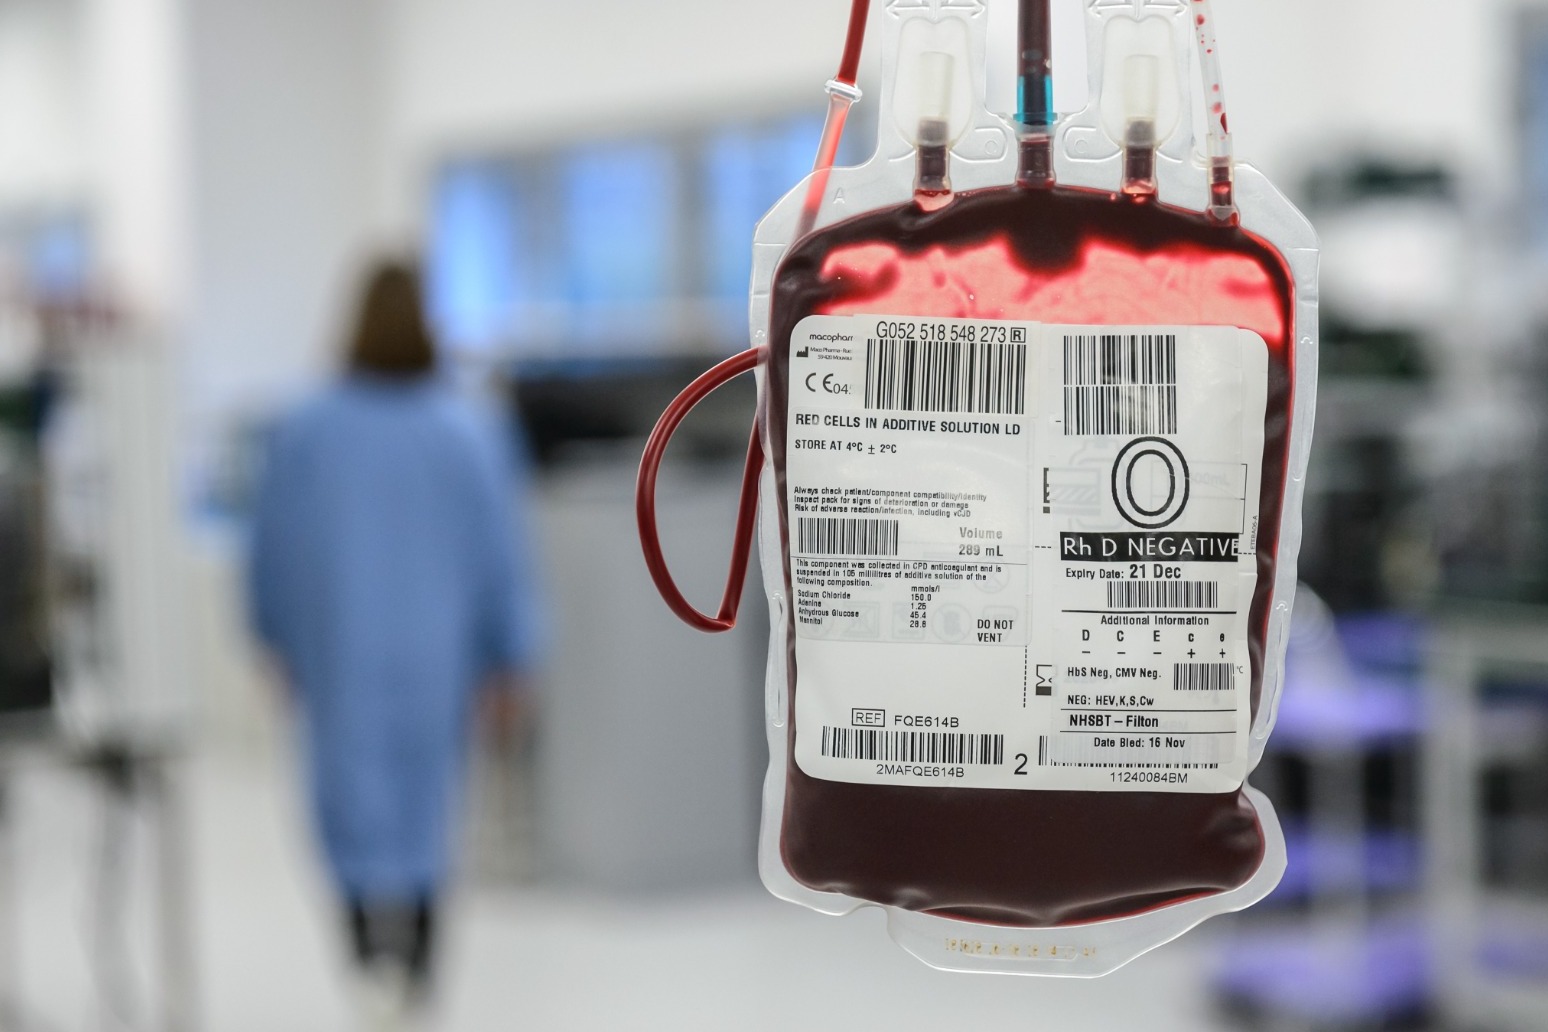 First-ever amber alert issued as NHS blood stocks fall critically low 